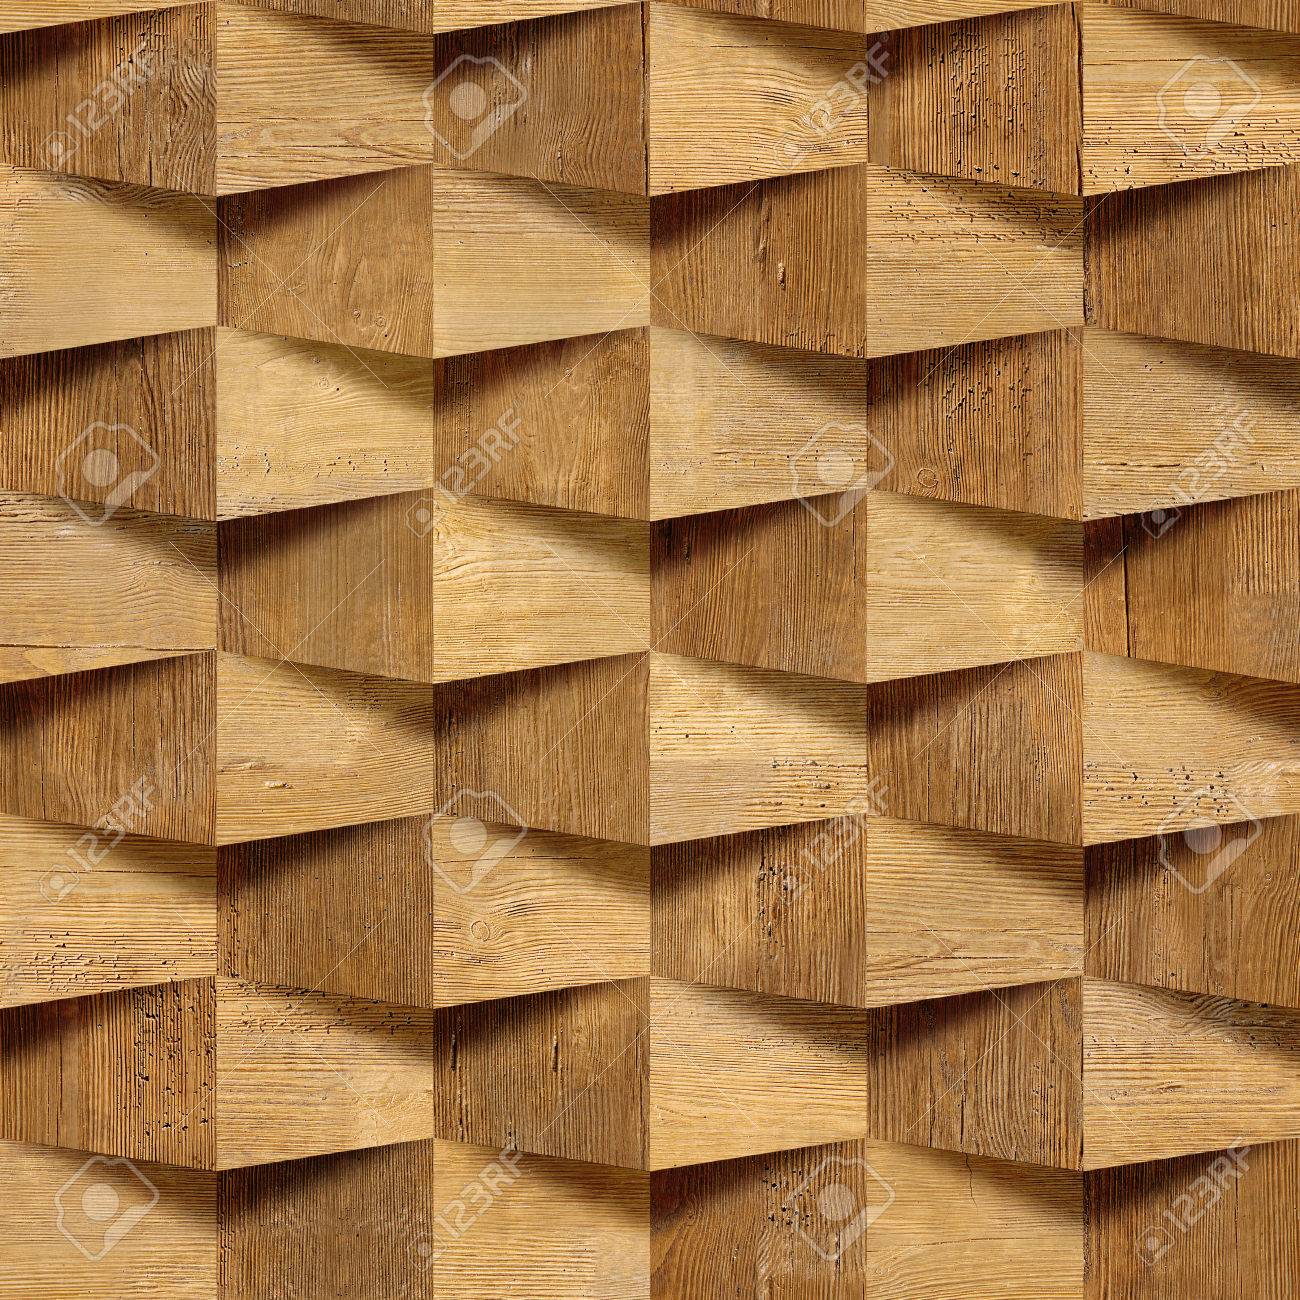 Wall Of The Brick Wooden Wallpaper Decorative Texture Parede